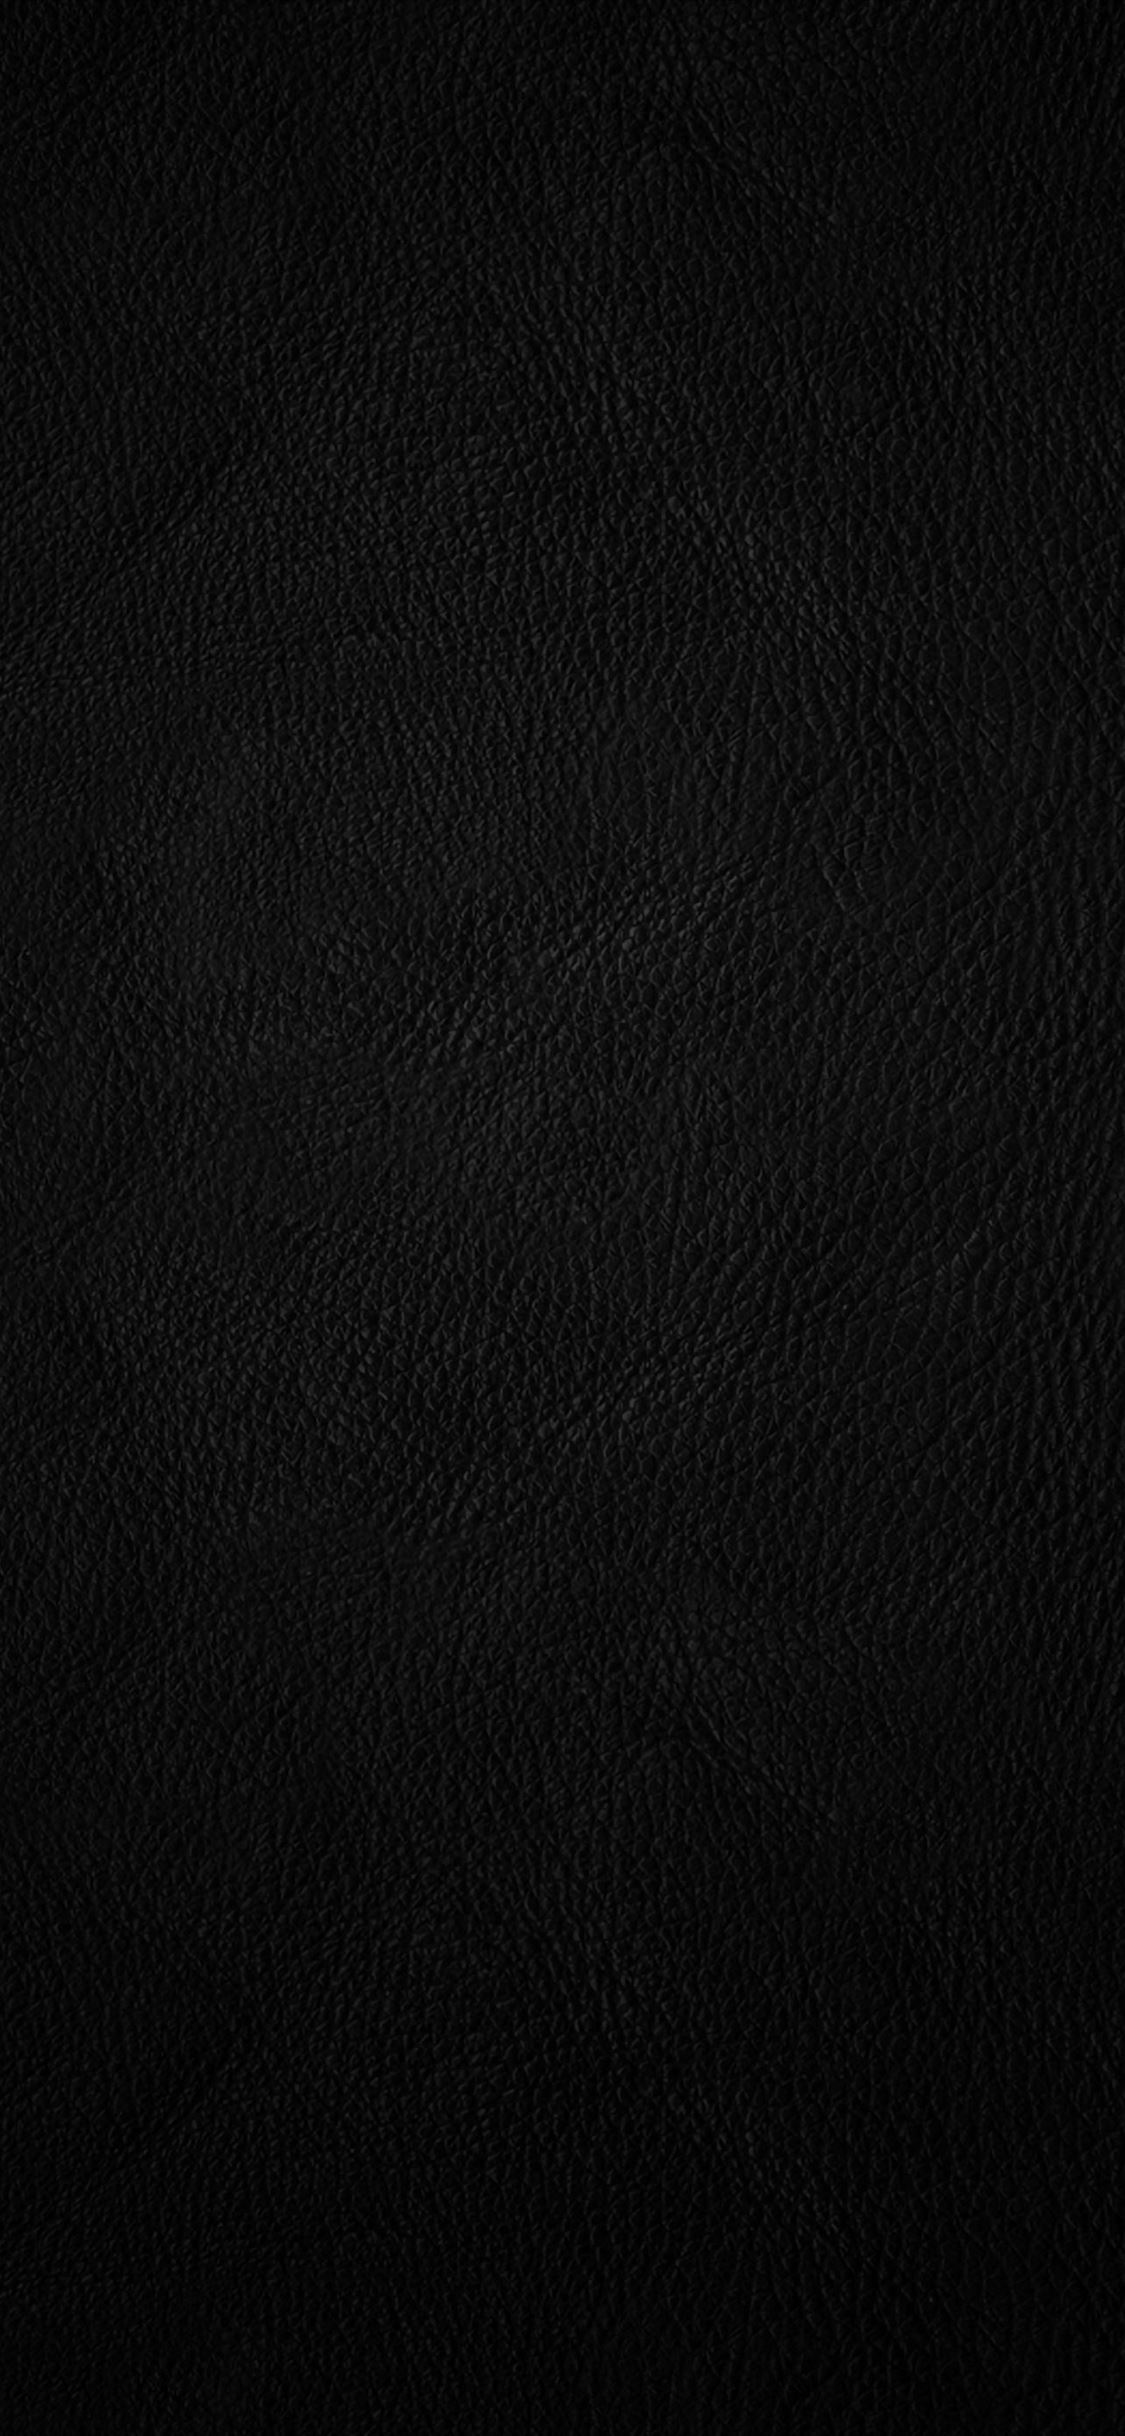 Black leather iPhone wallpaper 